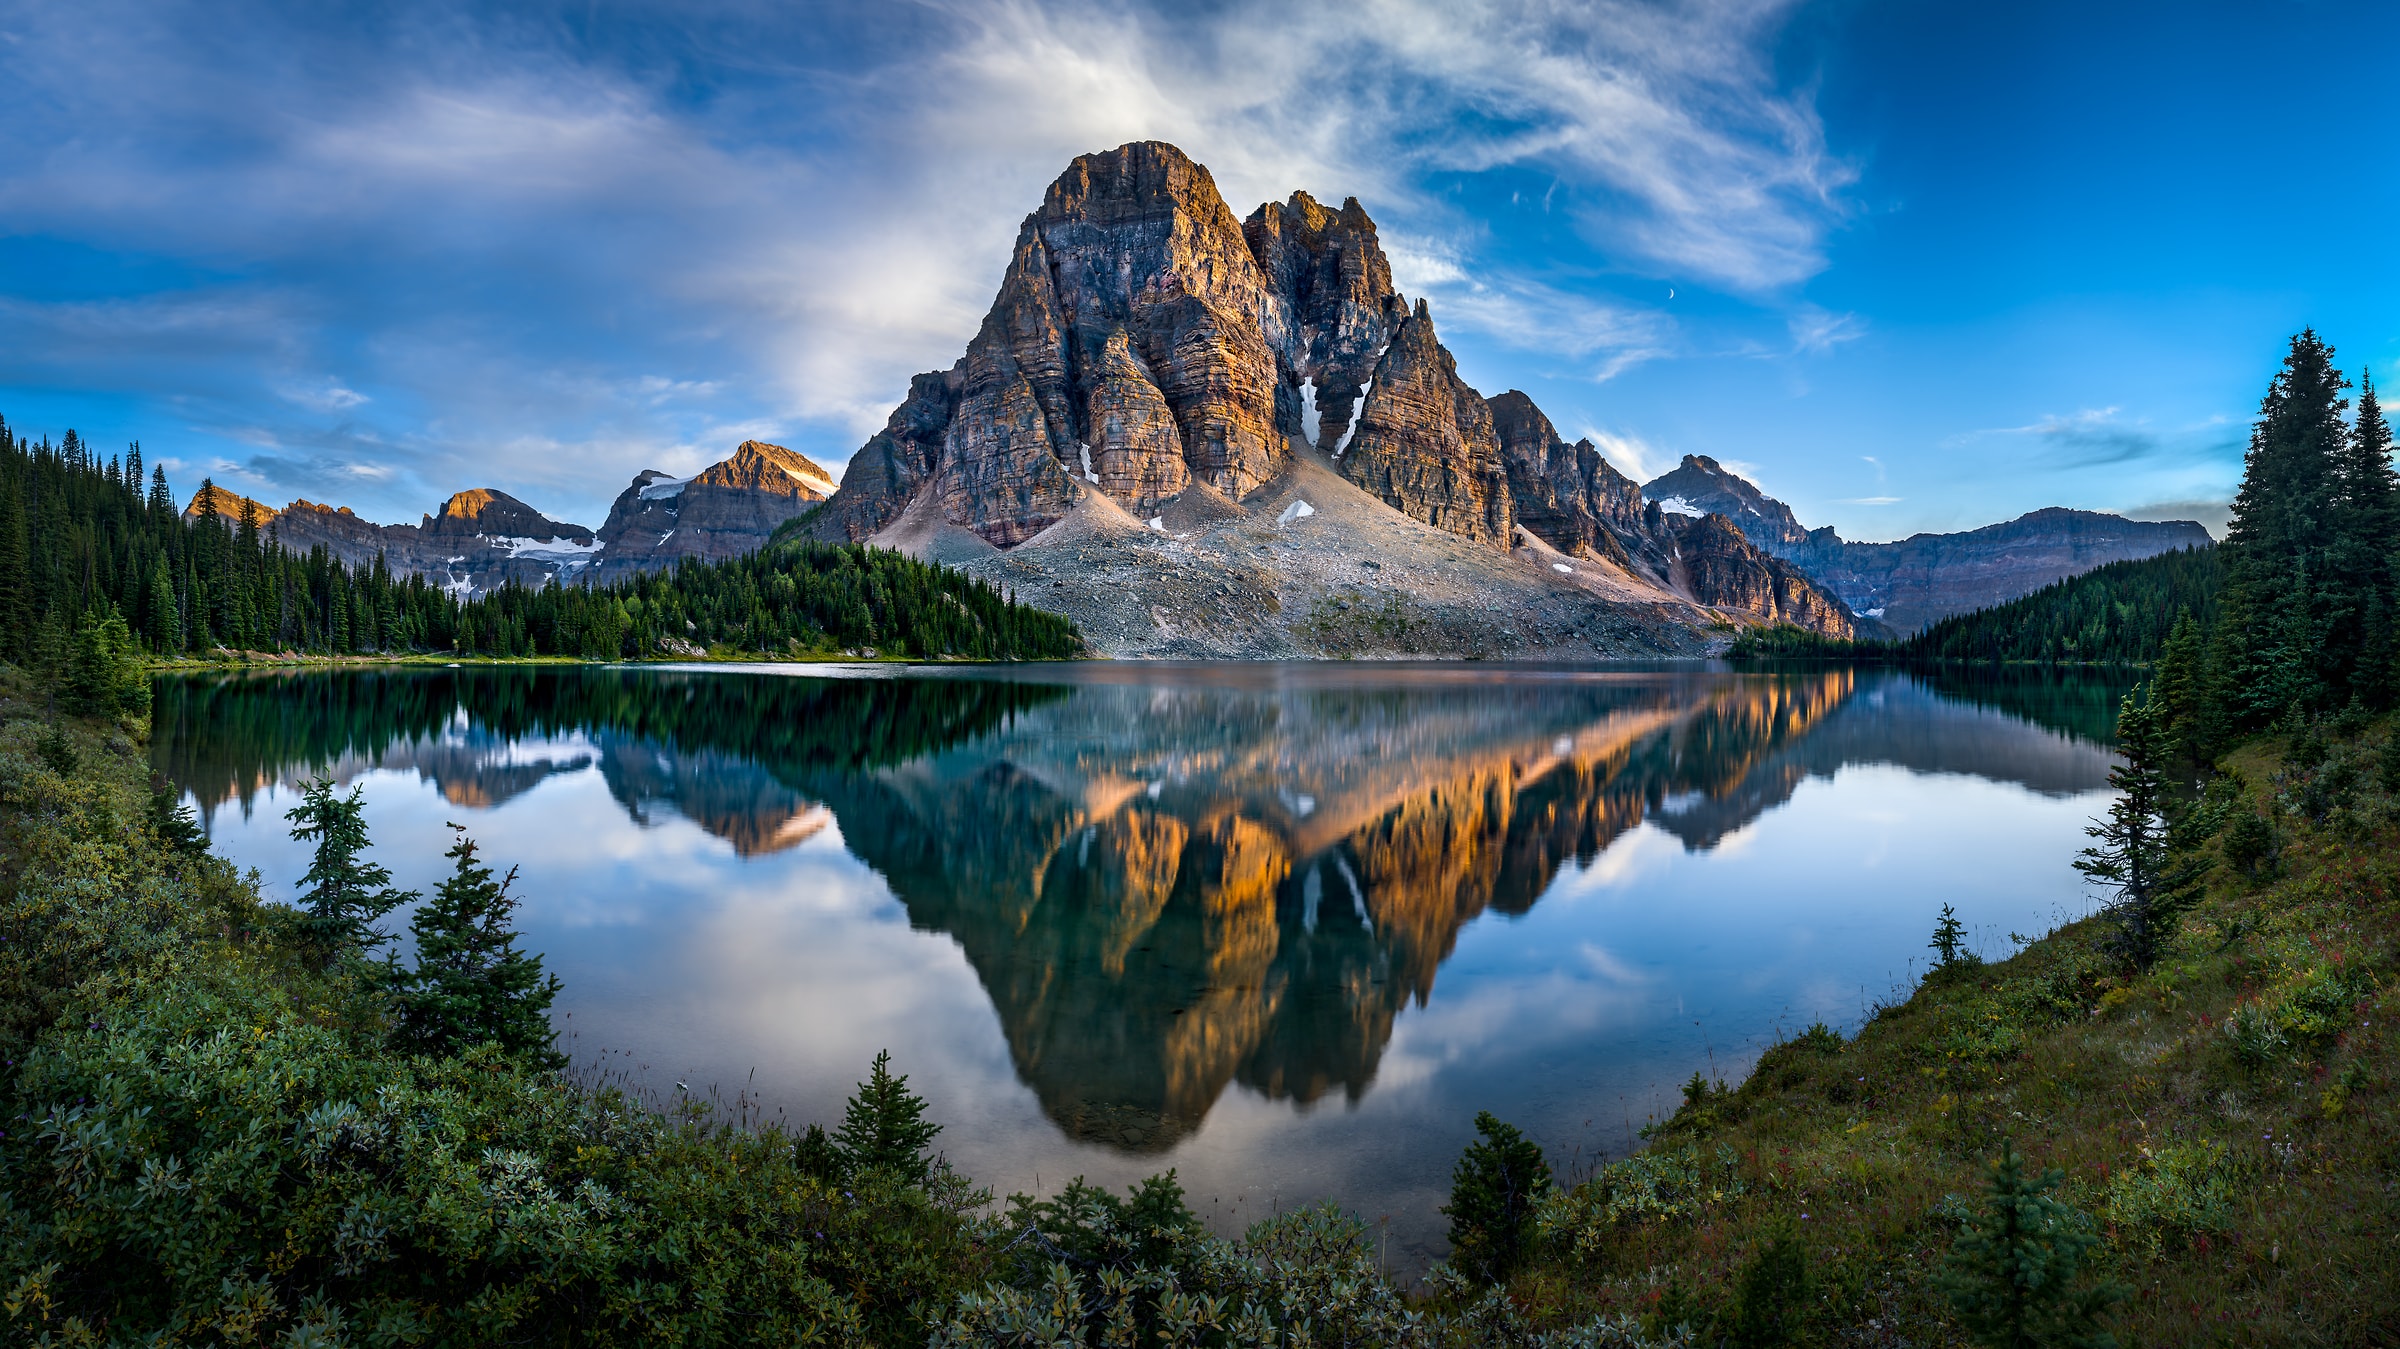 339 megapixels! A very high resolution, large-format VAST photo print of a lake with evergreen trees and a large mountain rockface in the foreground; wilderness landscape photograph created by Tim Shields in Sunburst Mountain, British Columbia, Canada.